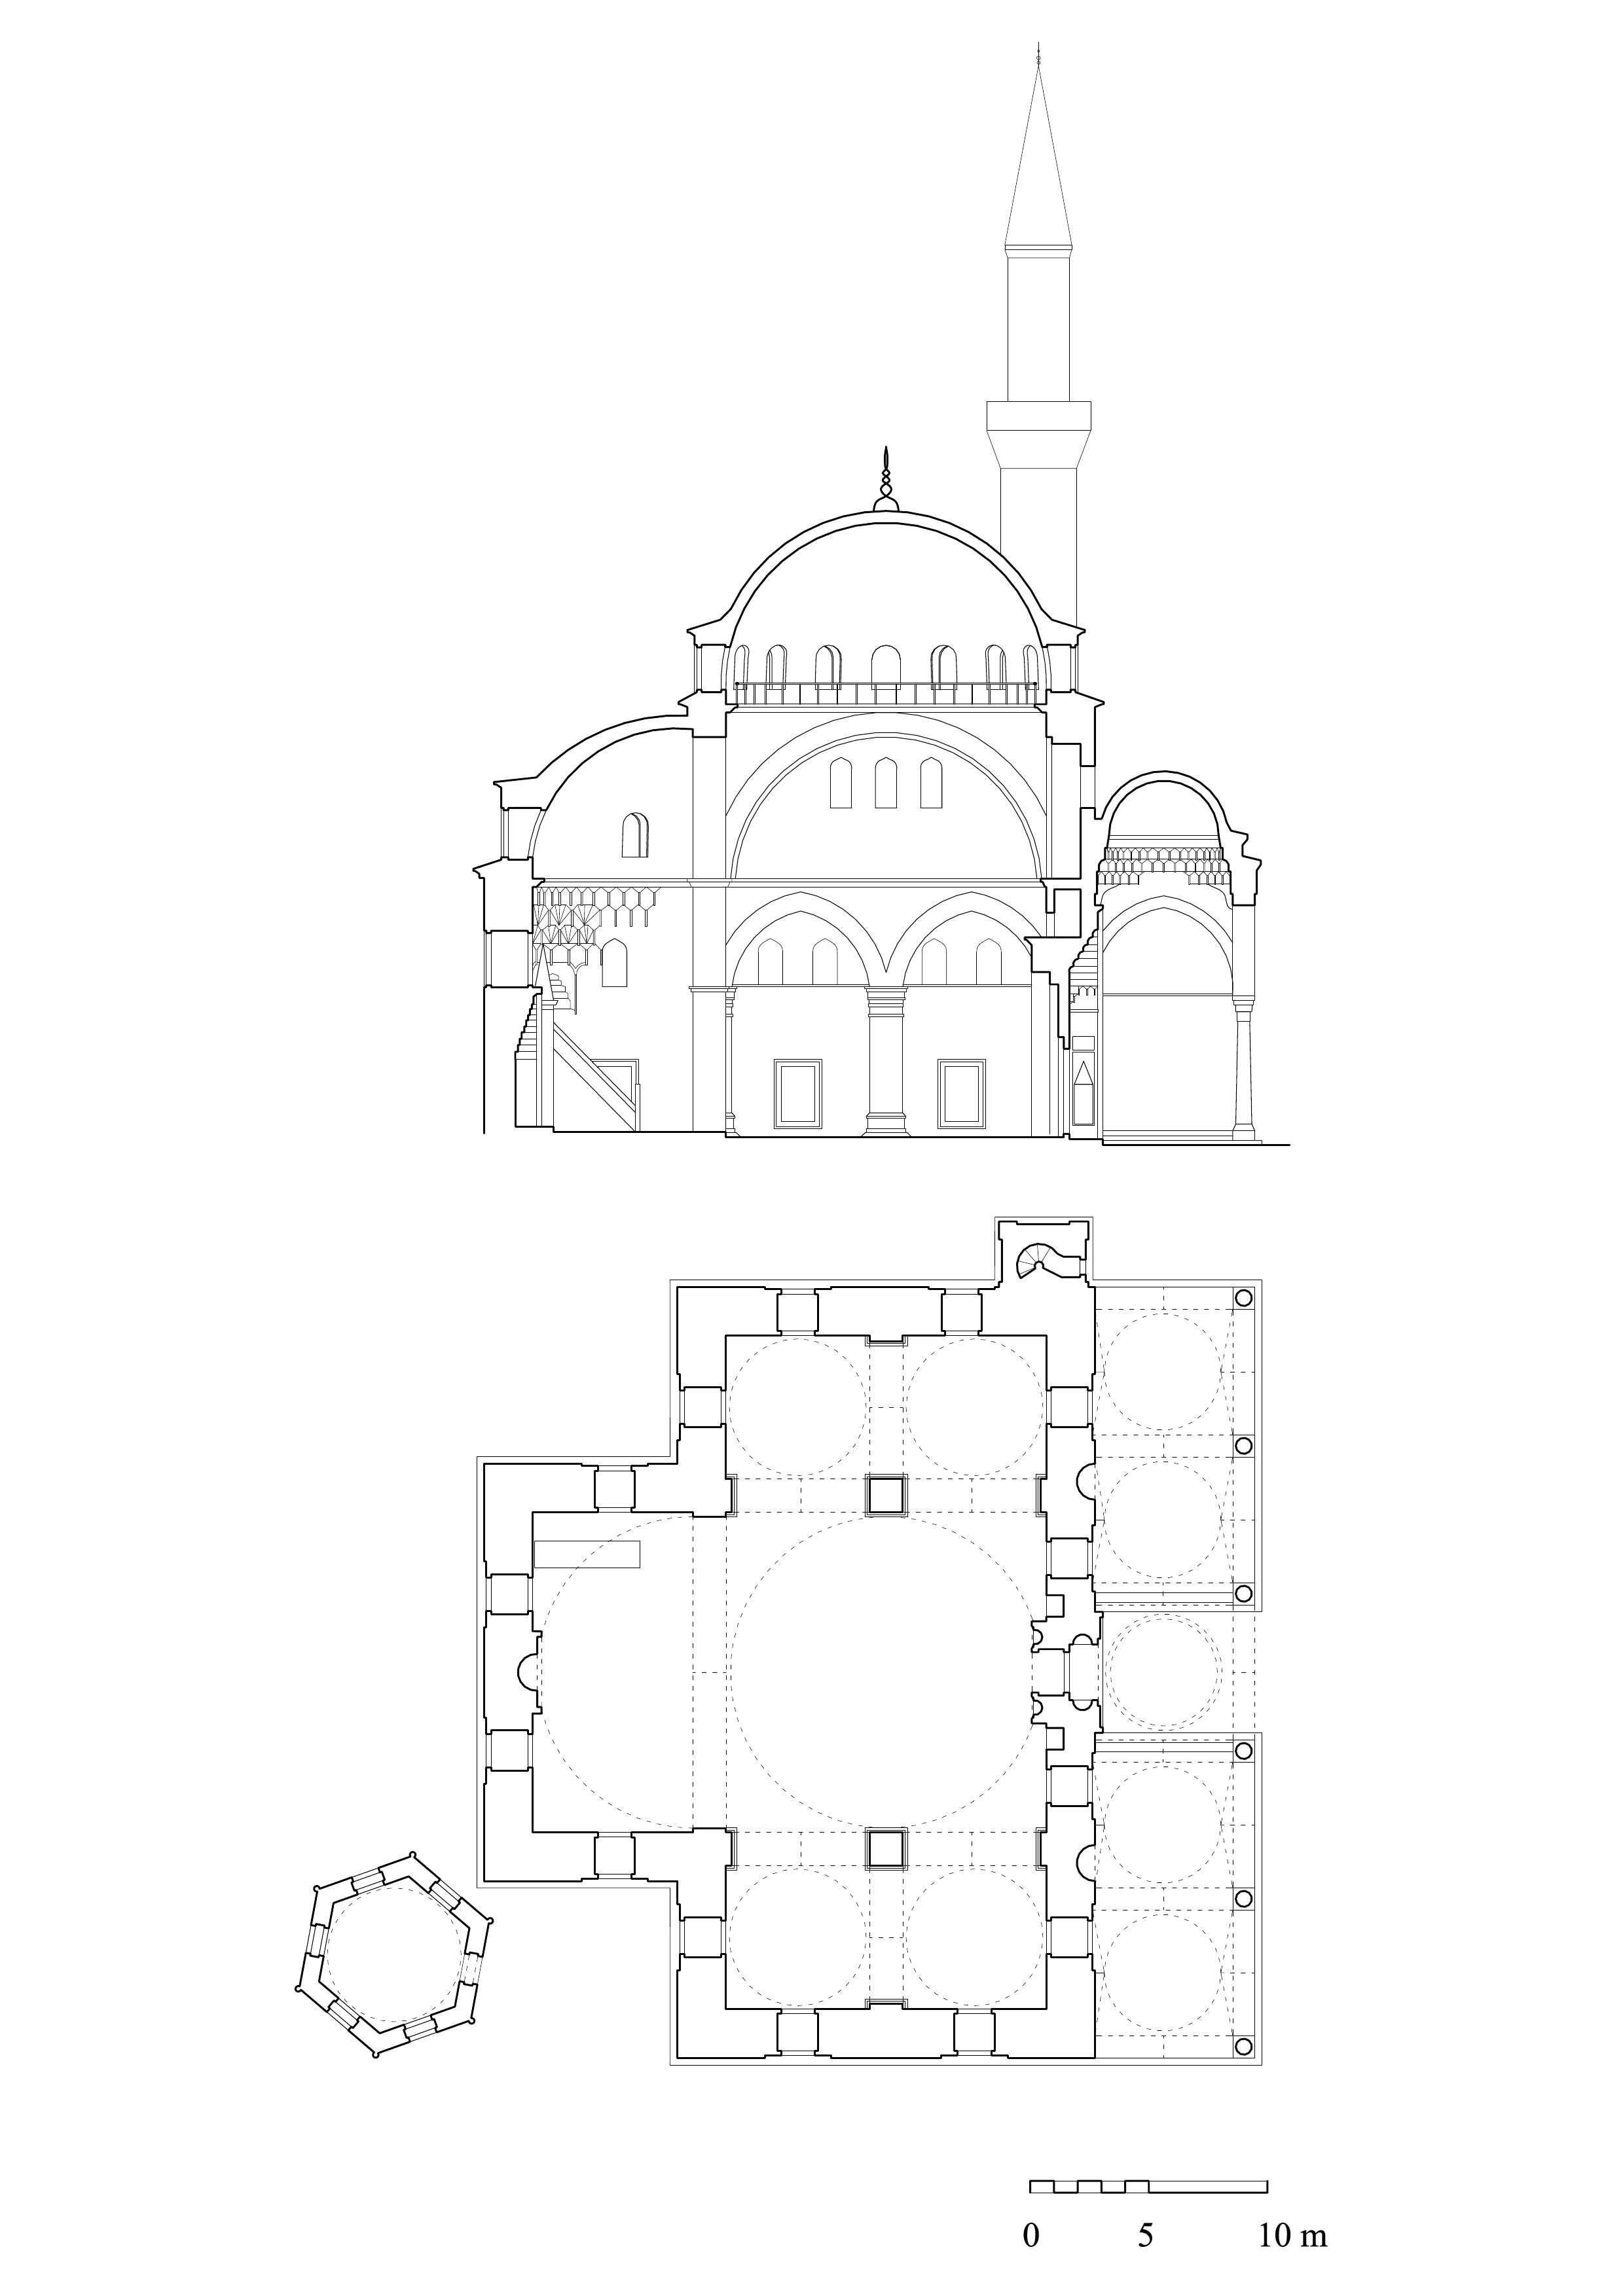 Atik Ali Paşa Camii - Floor plan of the mosque and mausoleum, and cross-section of mosque. DWG file in AutoCAD 2000 format. Click the download button to download a zipped file containing the .dwg file.